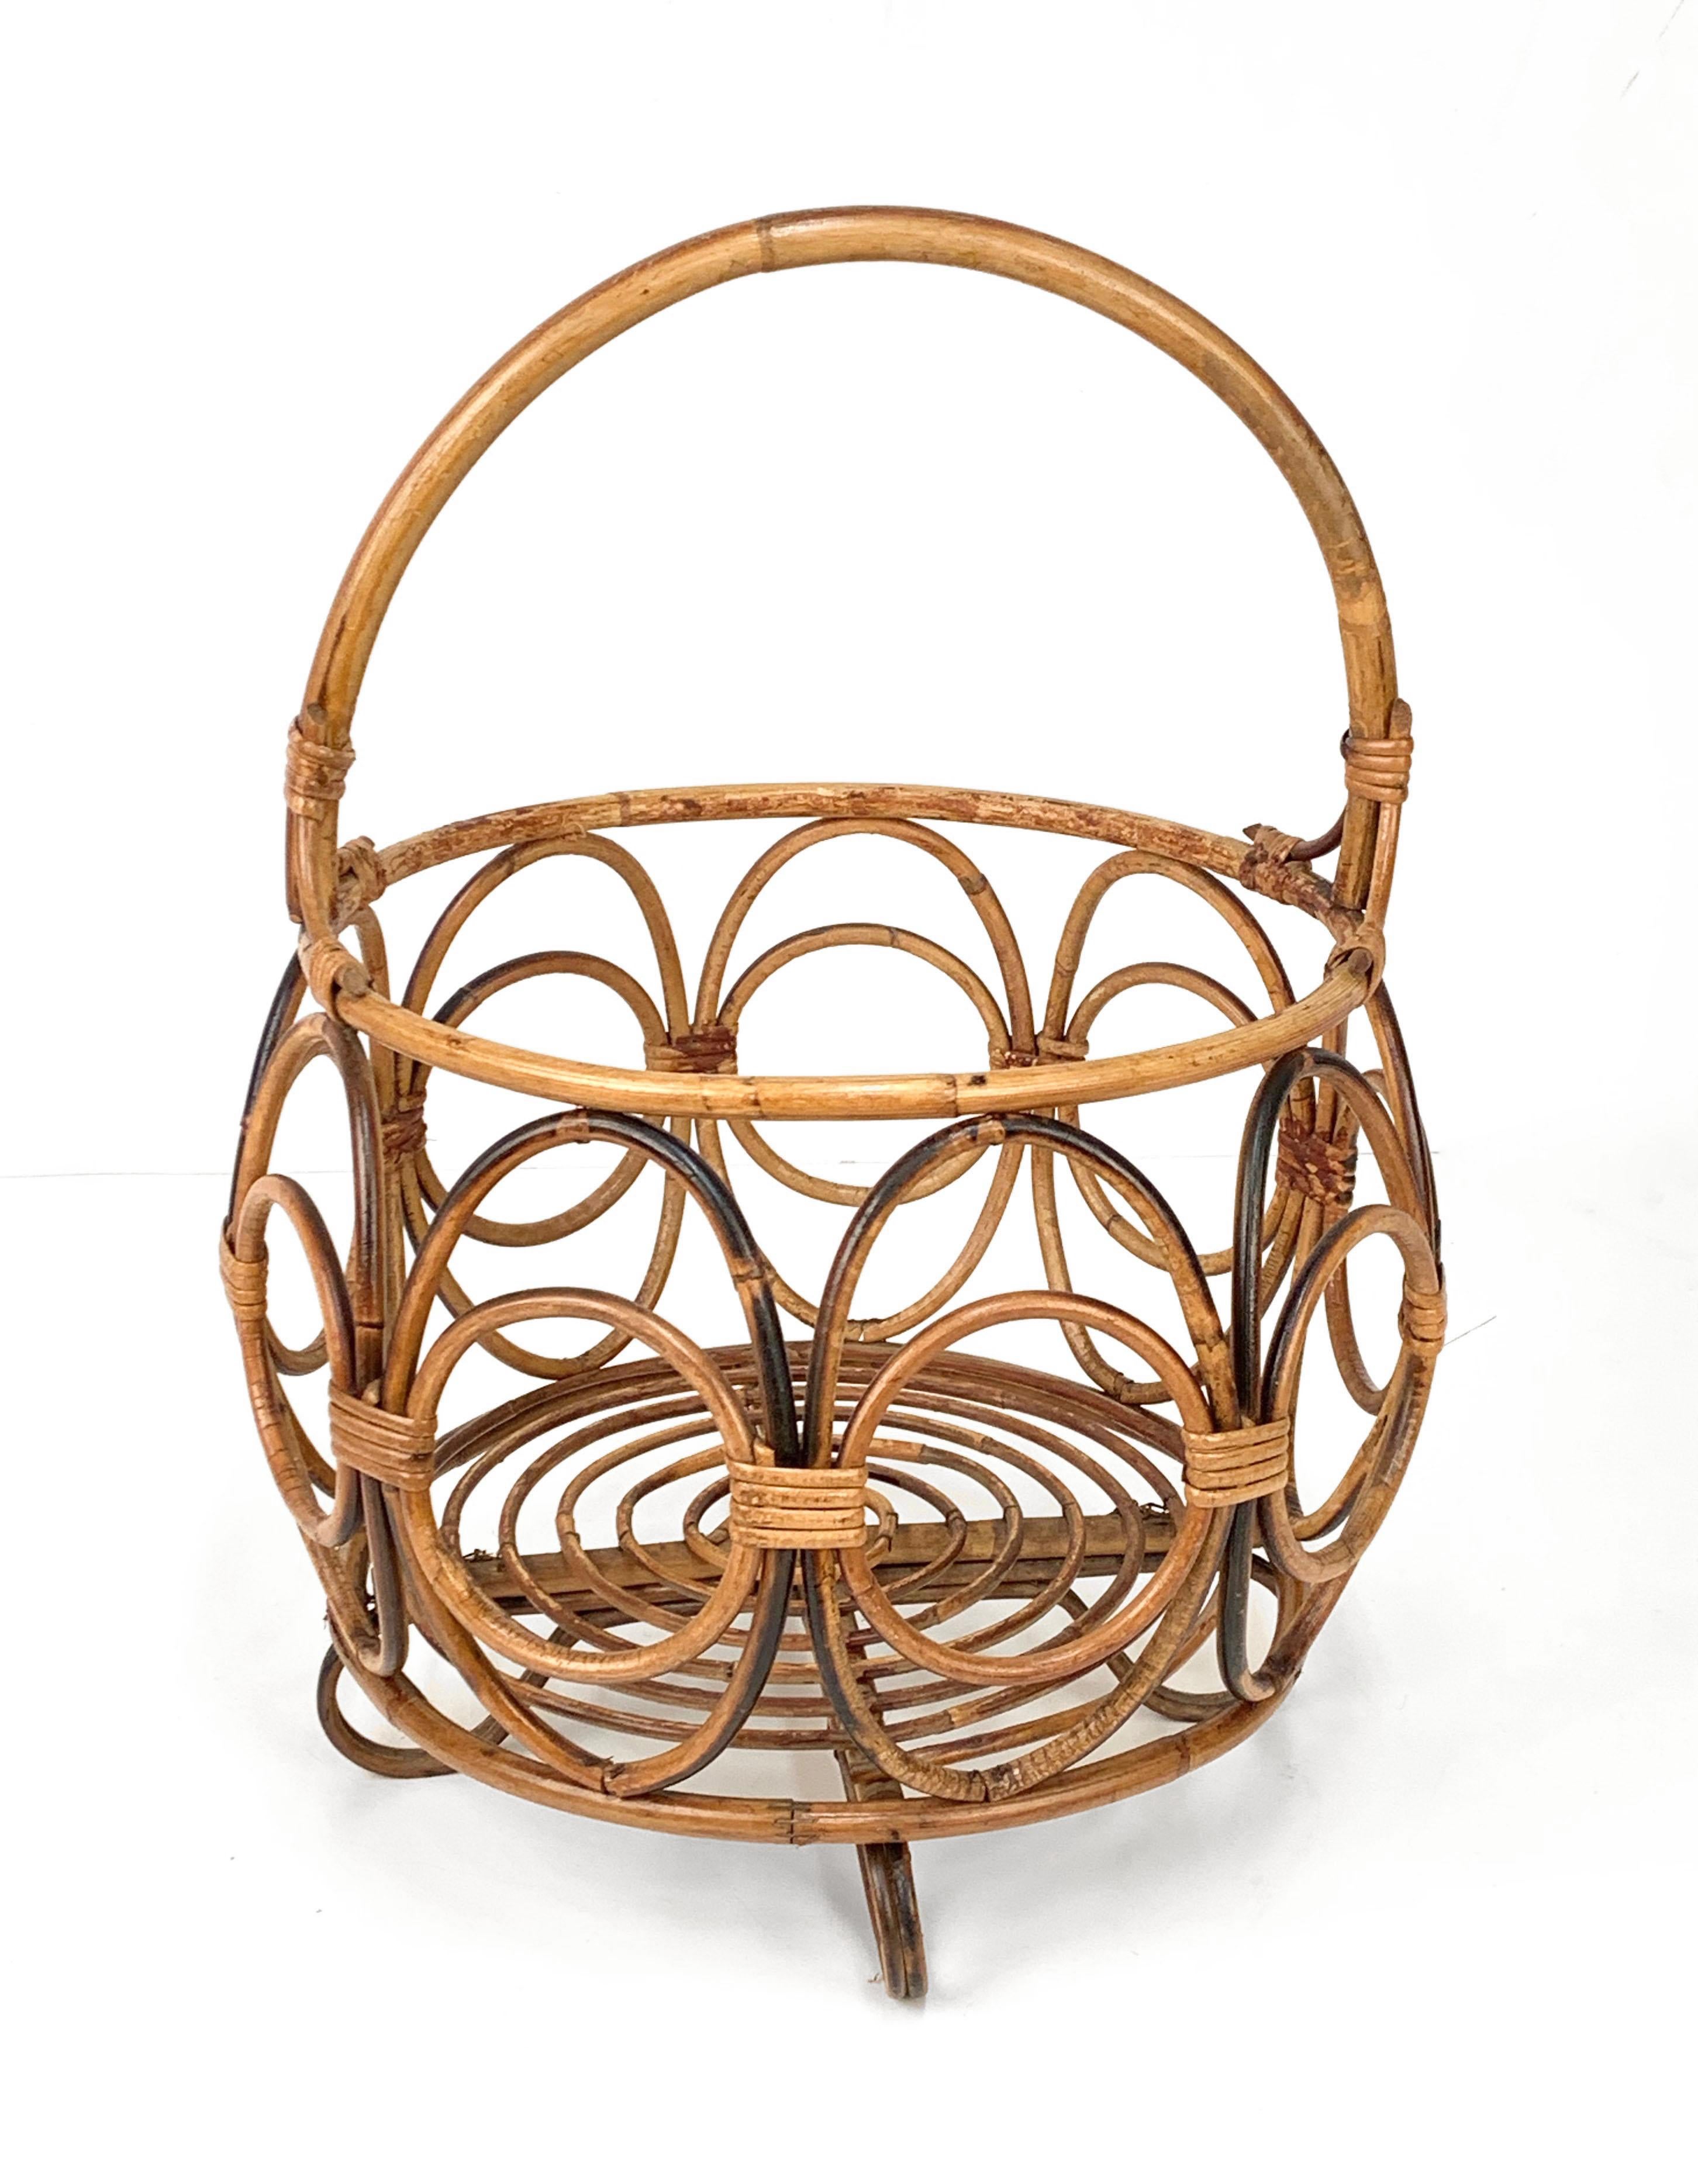 Midcentury French Riviera Bamboo and Rattan Italian Round Magazine Rack, 1960s For Sale 4